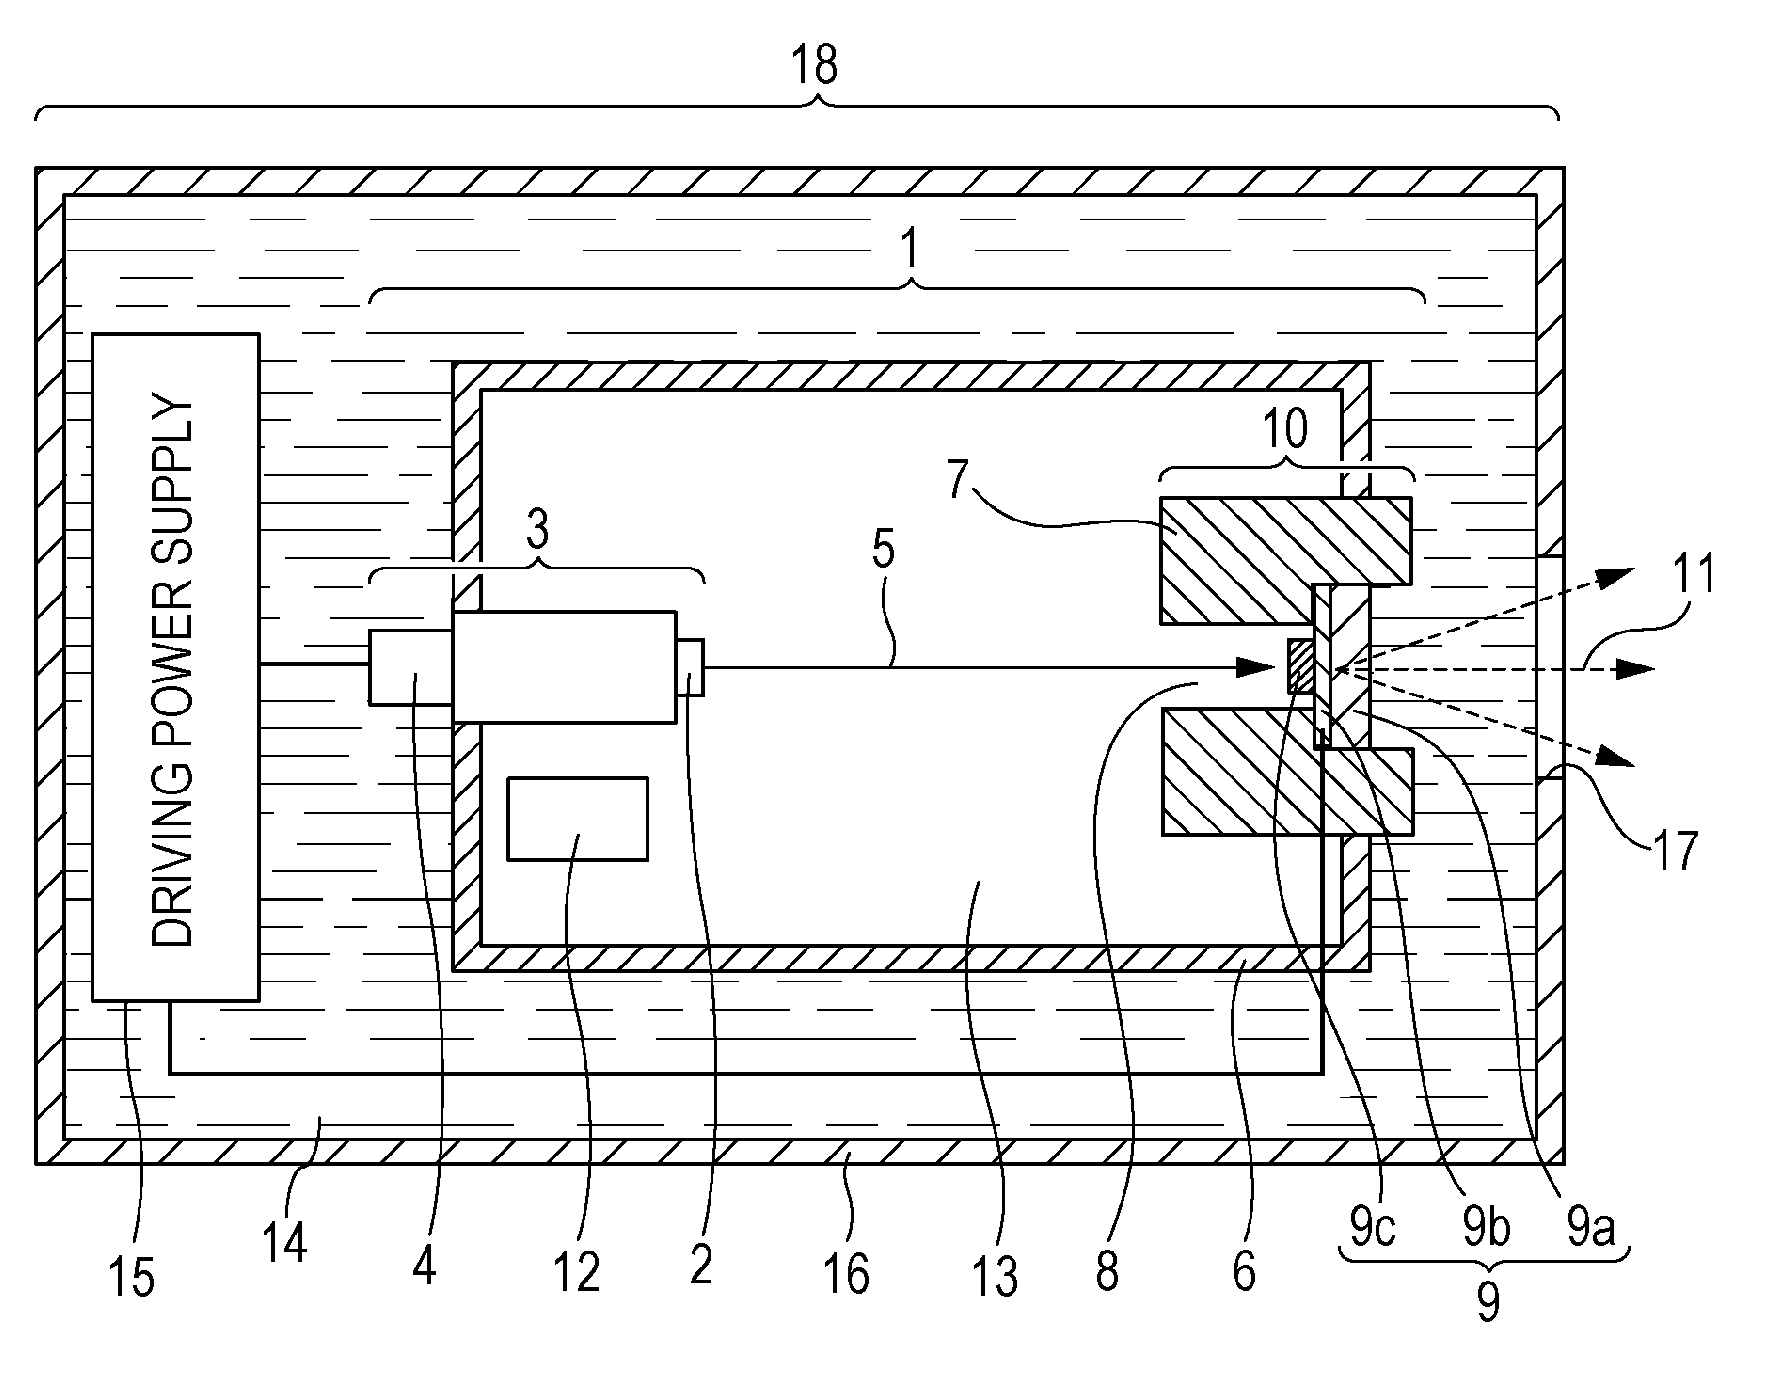 X-ray generator and x-ray imaging apparatus